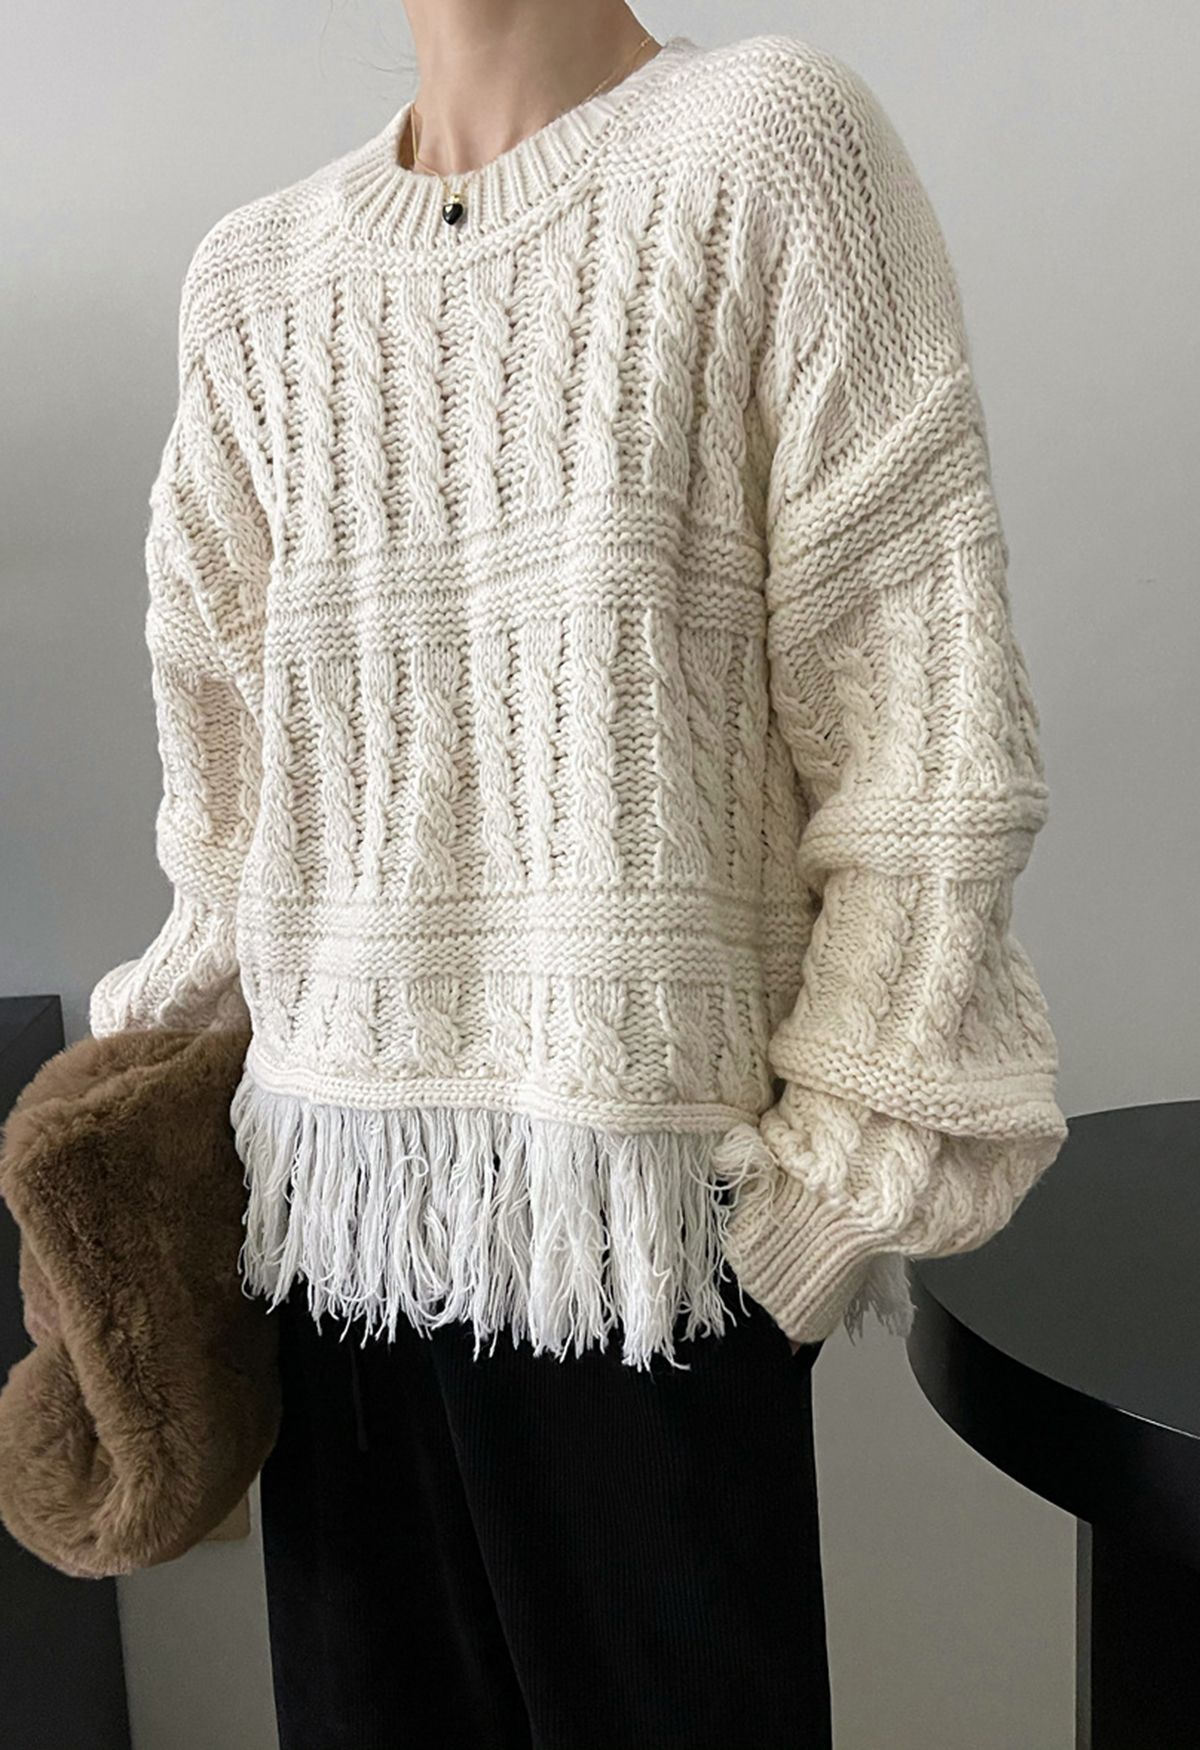 Fringed Hem Braided Knit Sweater in Ivory - Retro, Indie and Unique Fashion